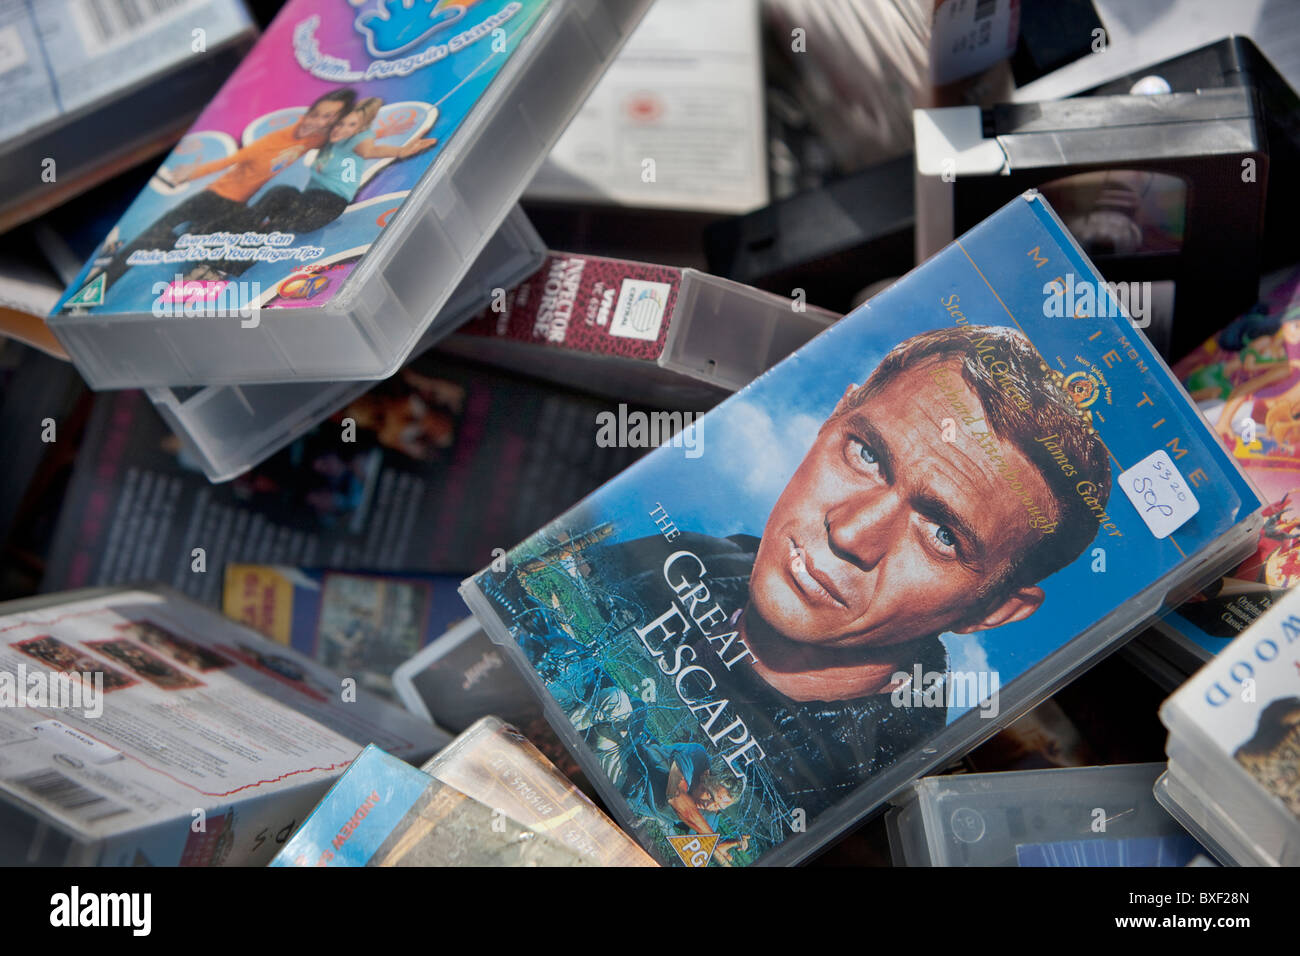 Old VHS tapes in a bargain bin. Stock Photo